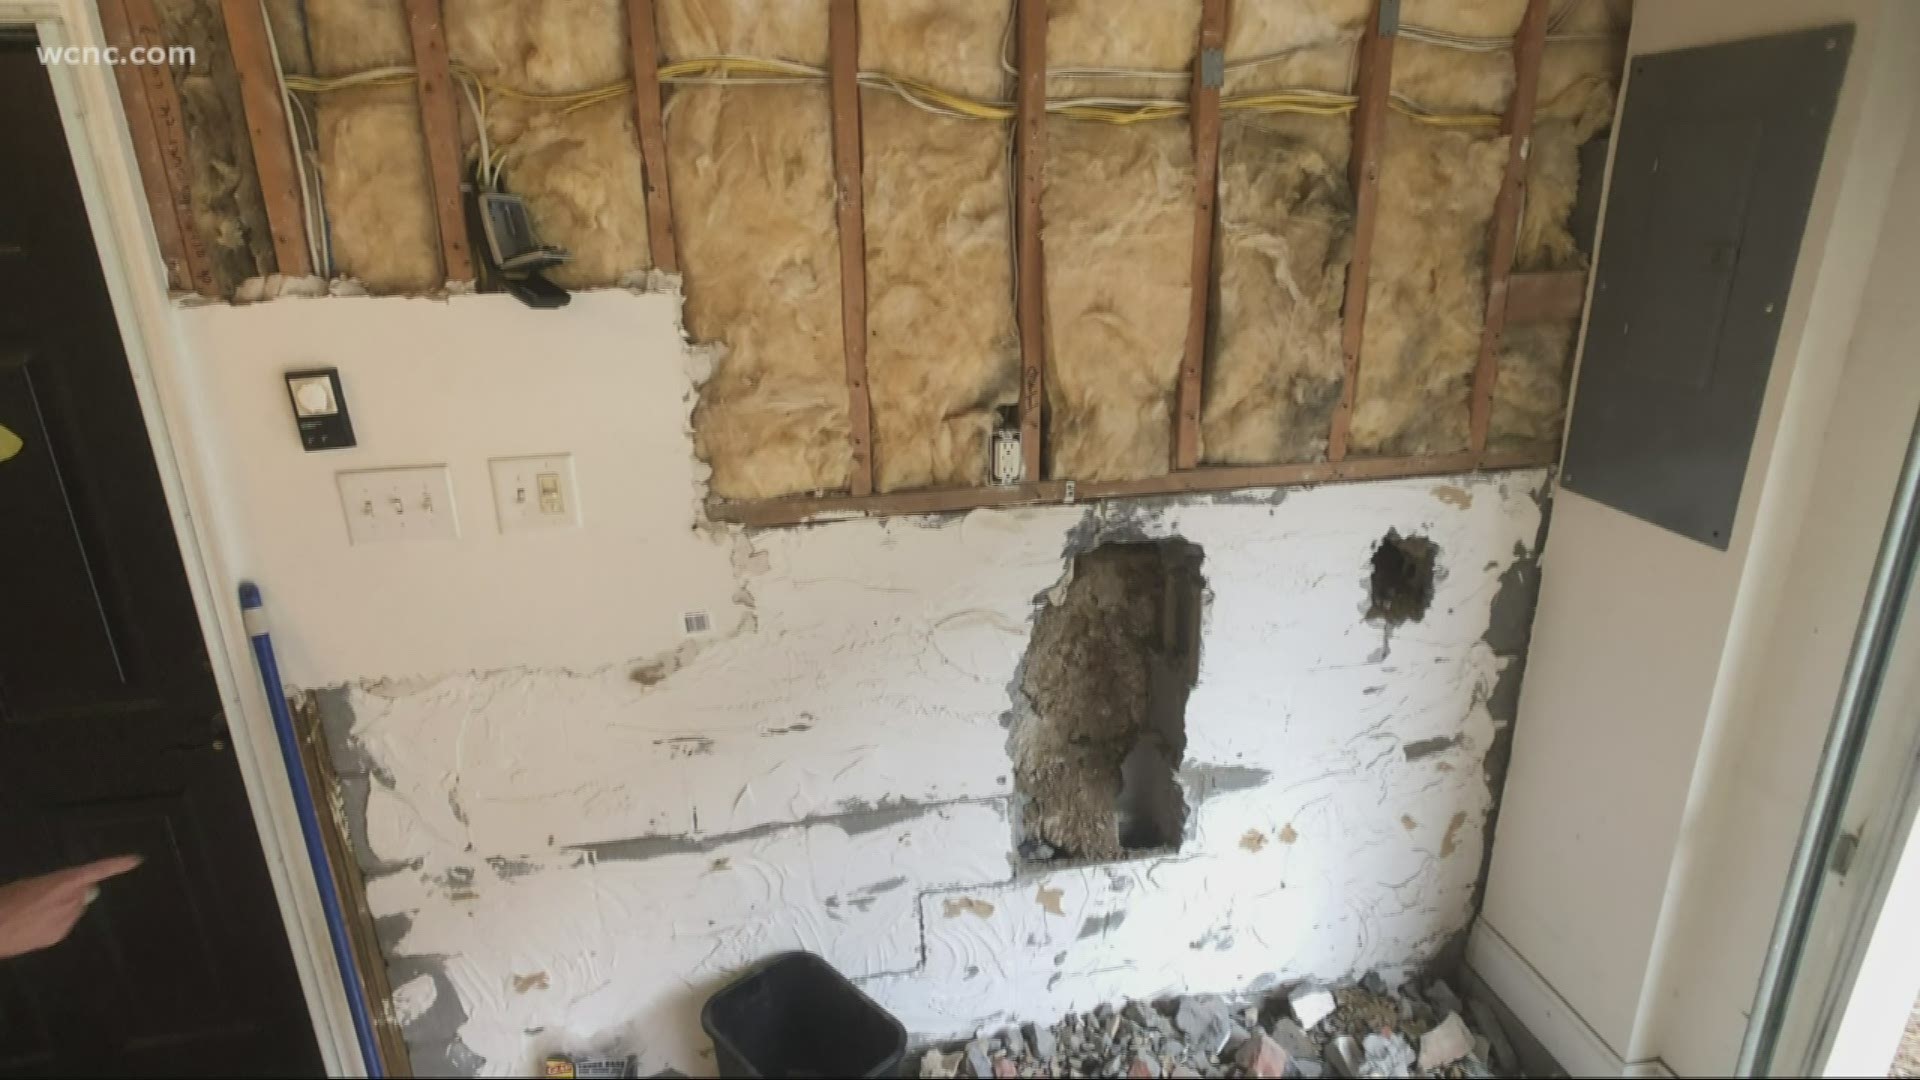 A Charlotte woman says the townhome in Ayrsley was built with serious and potentially life-threatening defects.